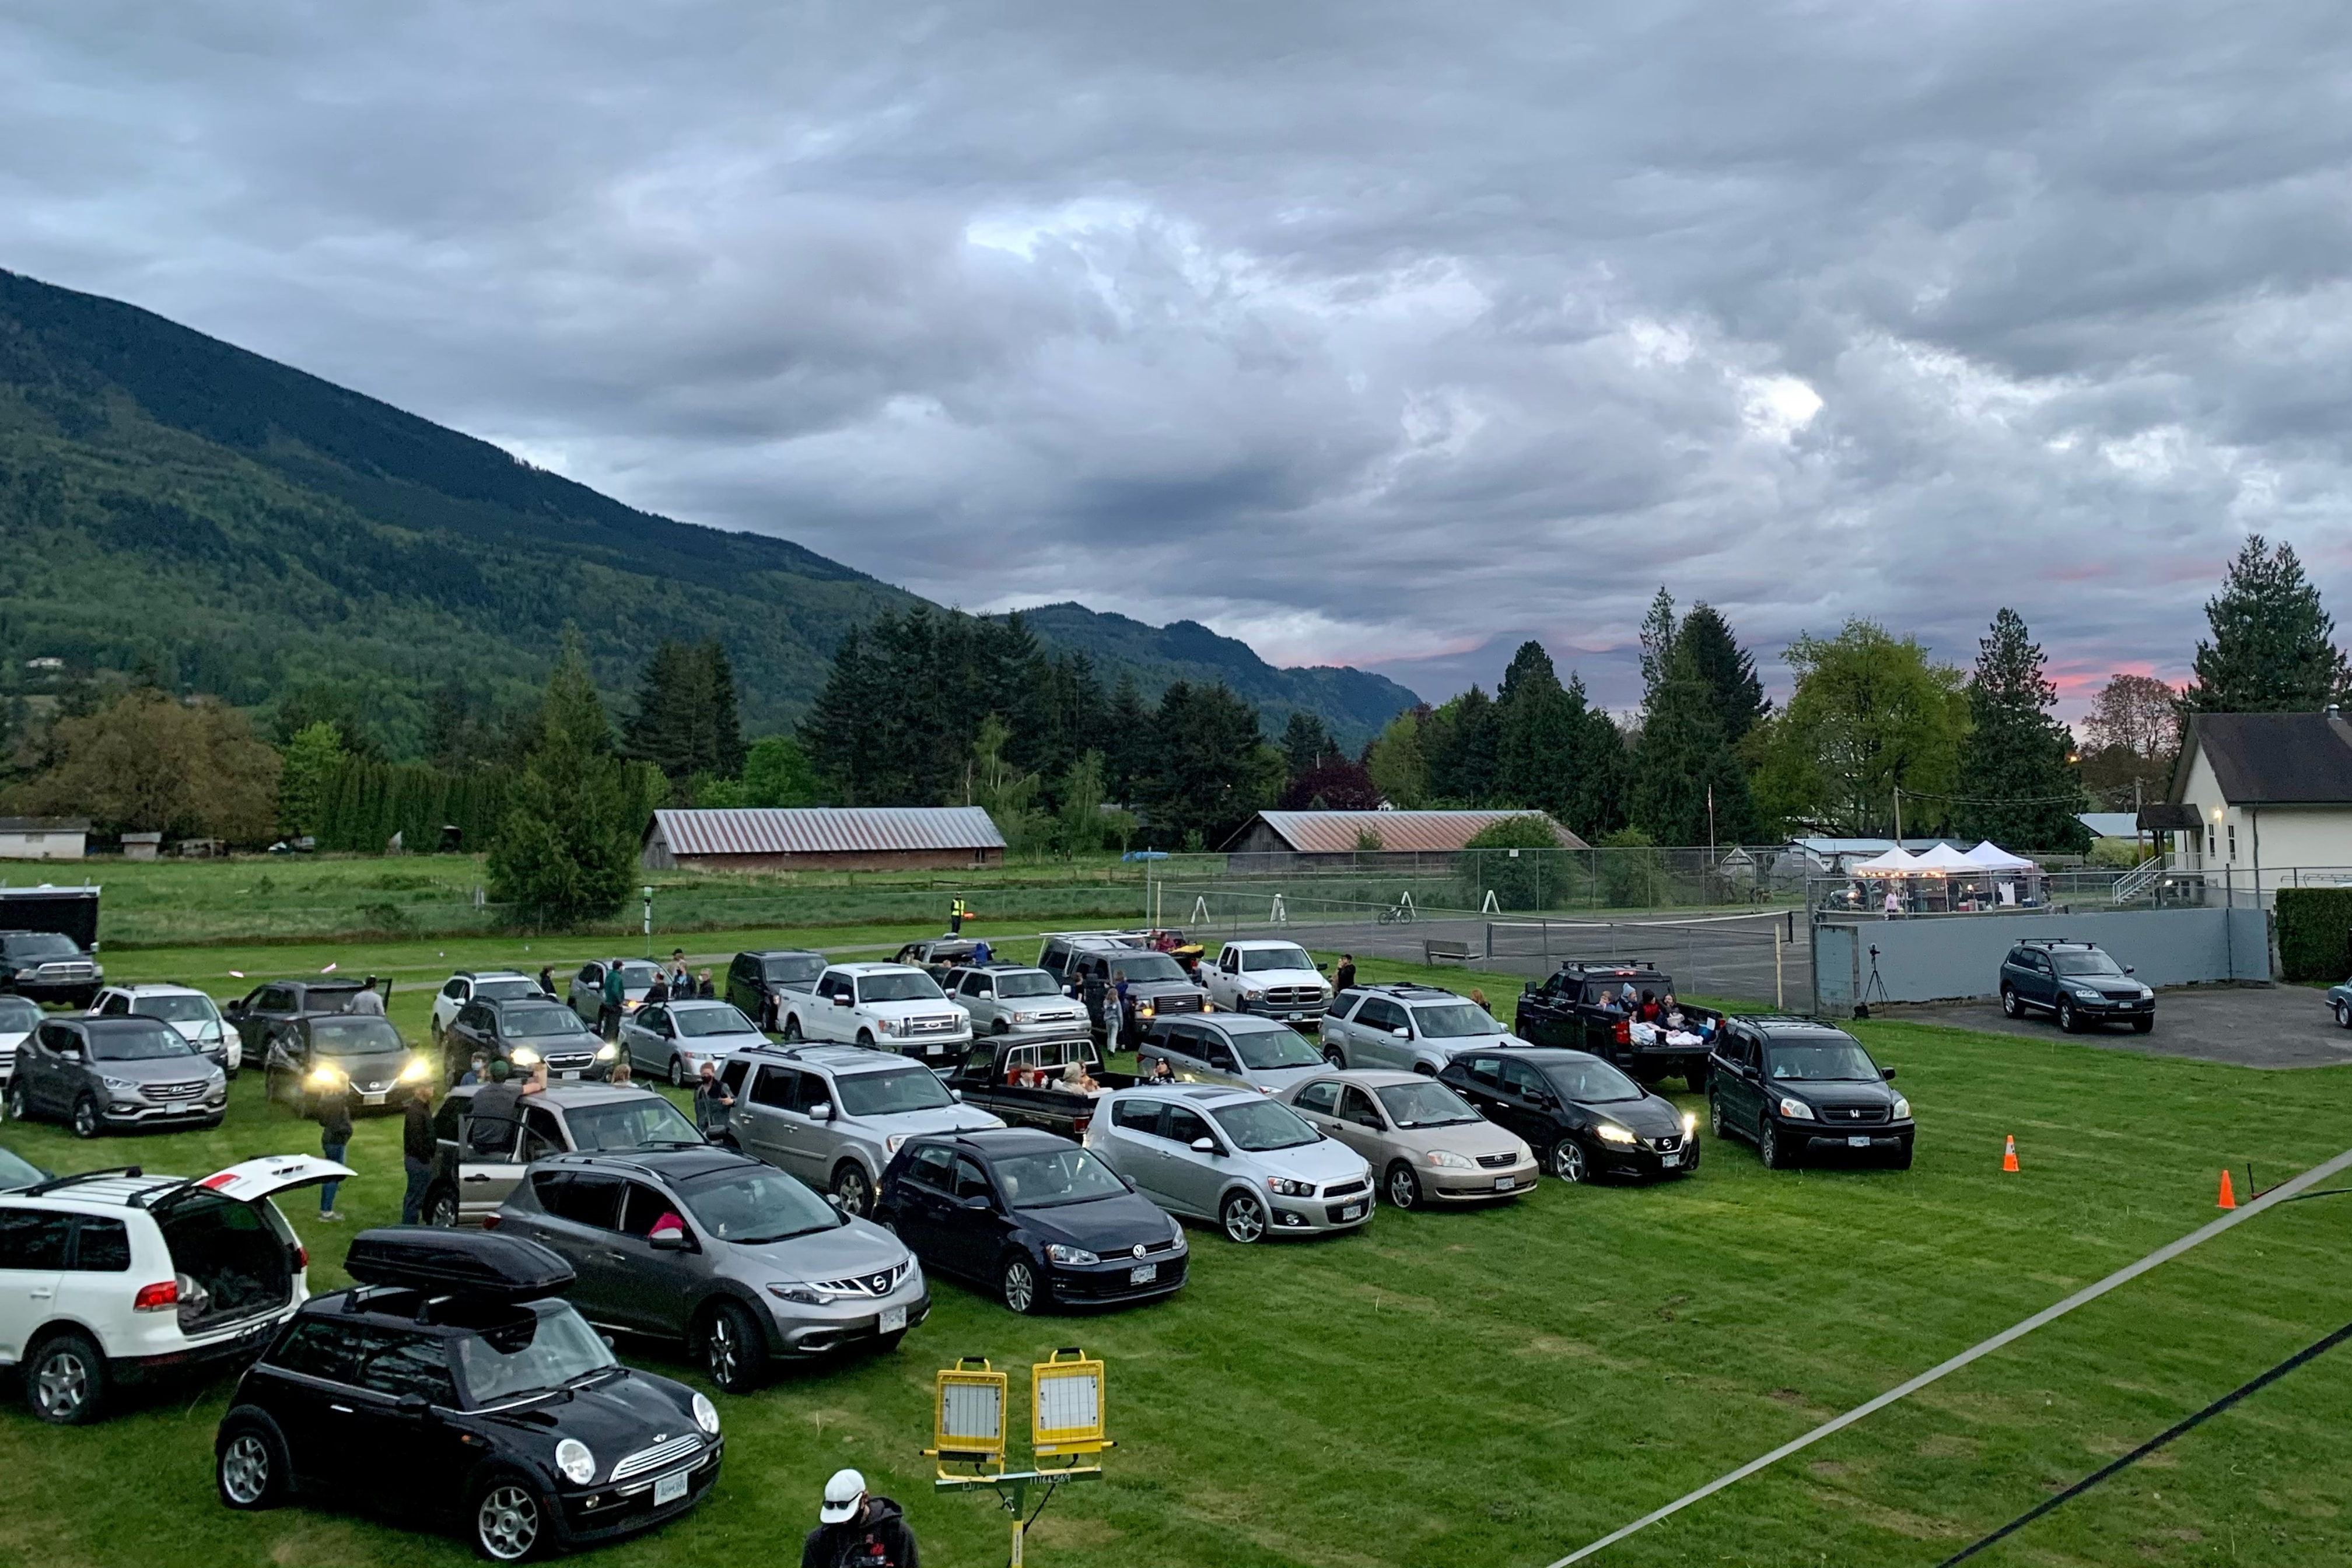 Cars are lined up in Yarrow, BC for Himalayan Life's showing of Himalaya, a film festival.